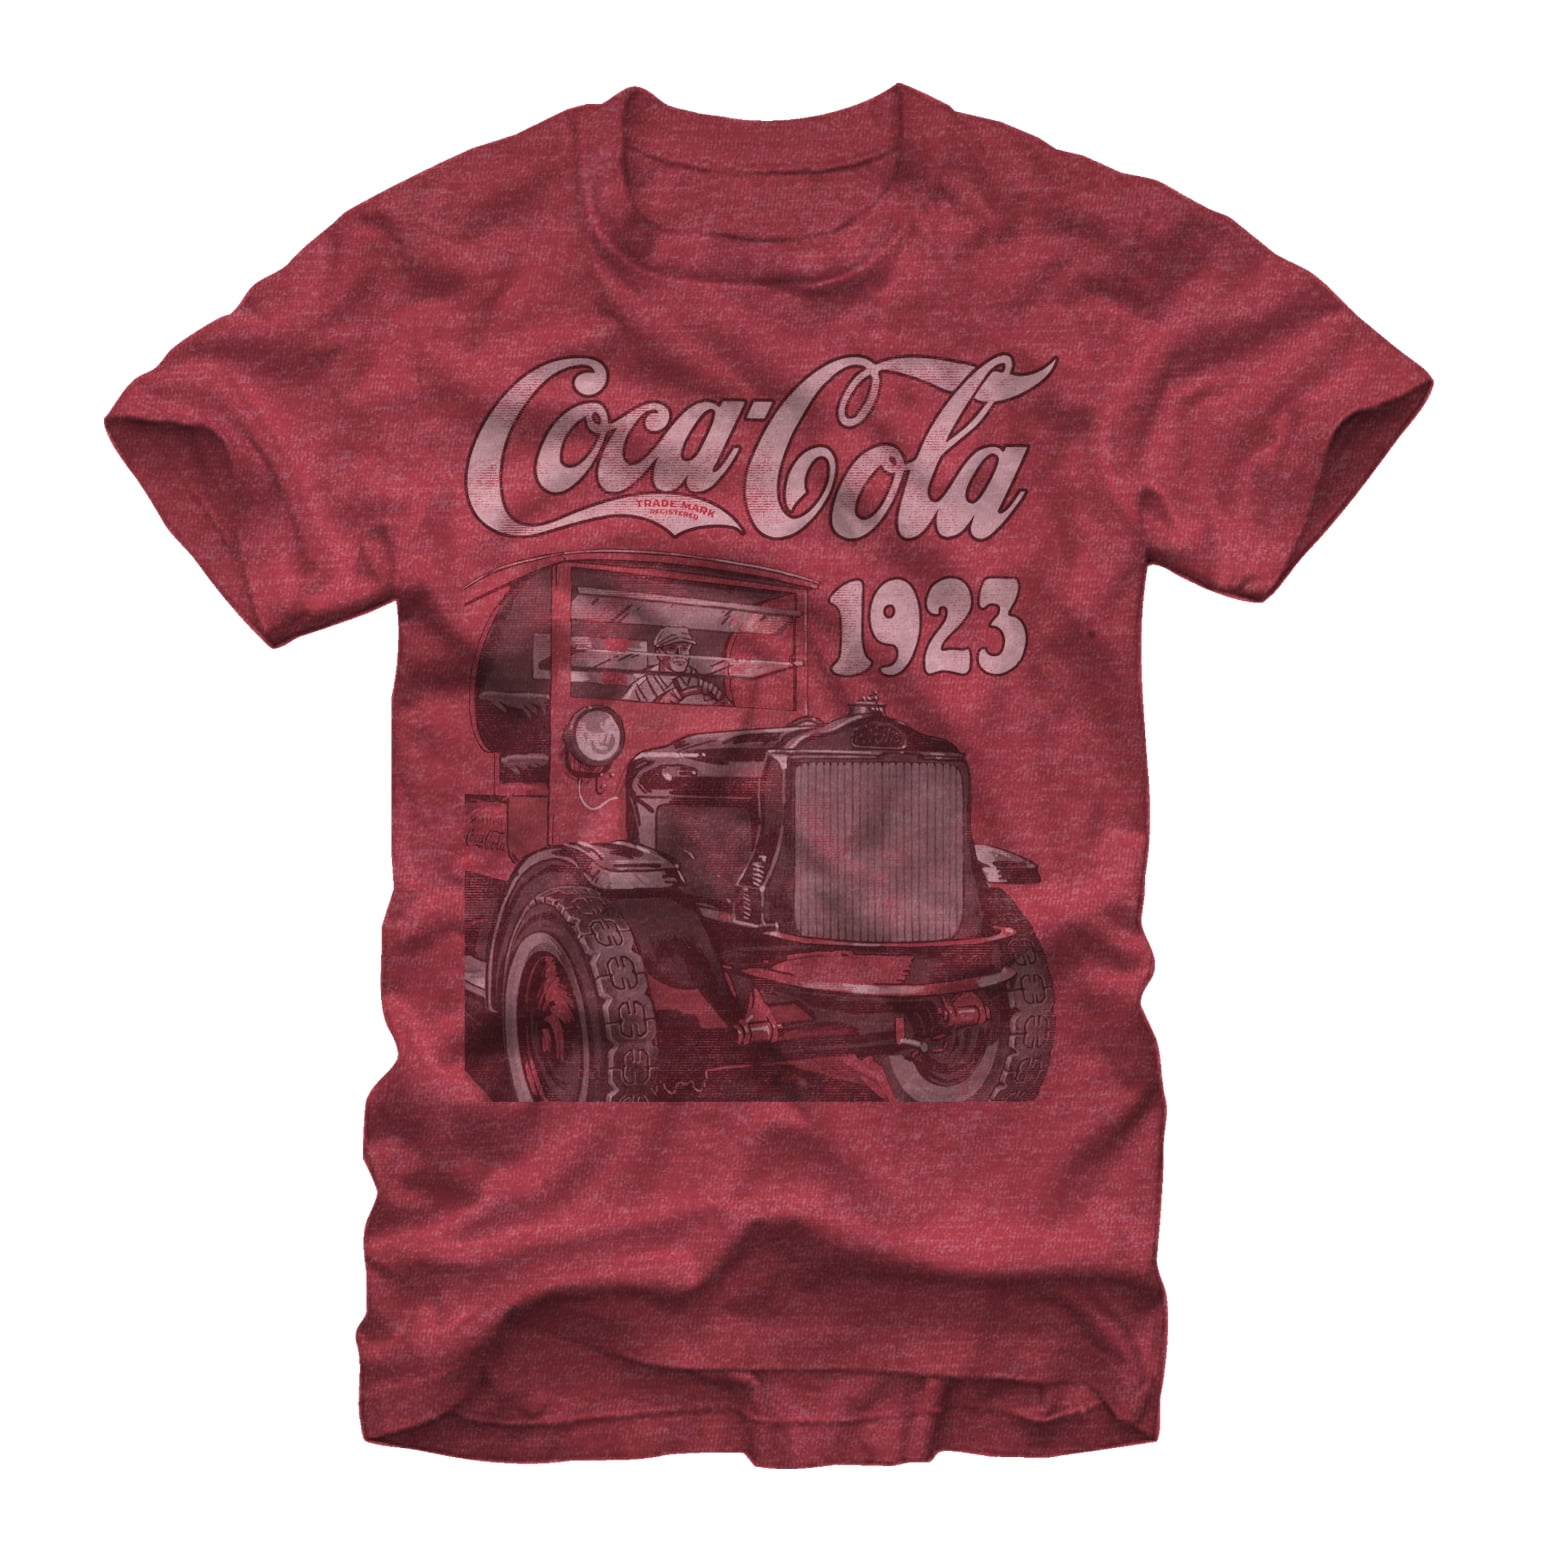 Coca-Cola Black Tee T-shirt Size 4XL 4X-Large Things Go Better with Coke 